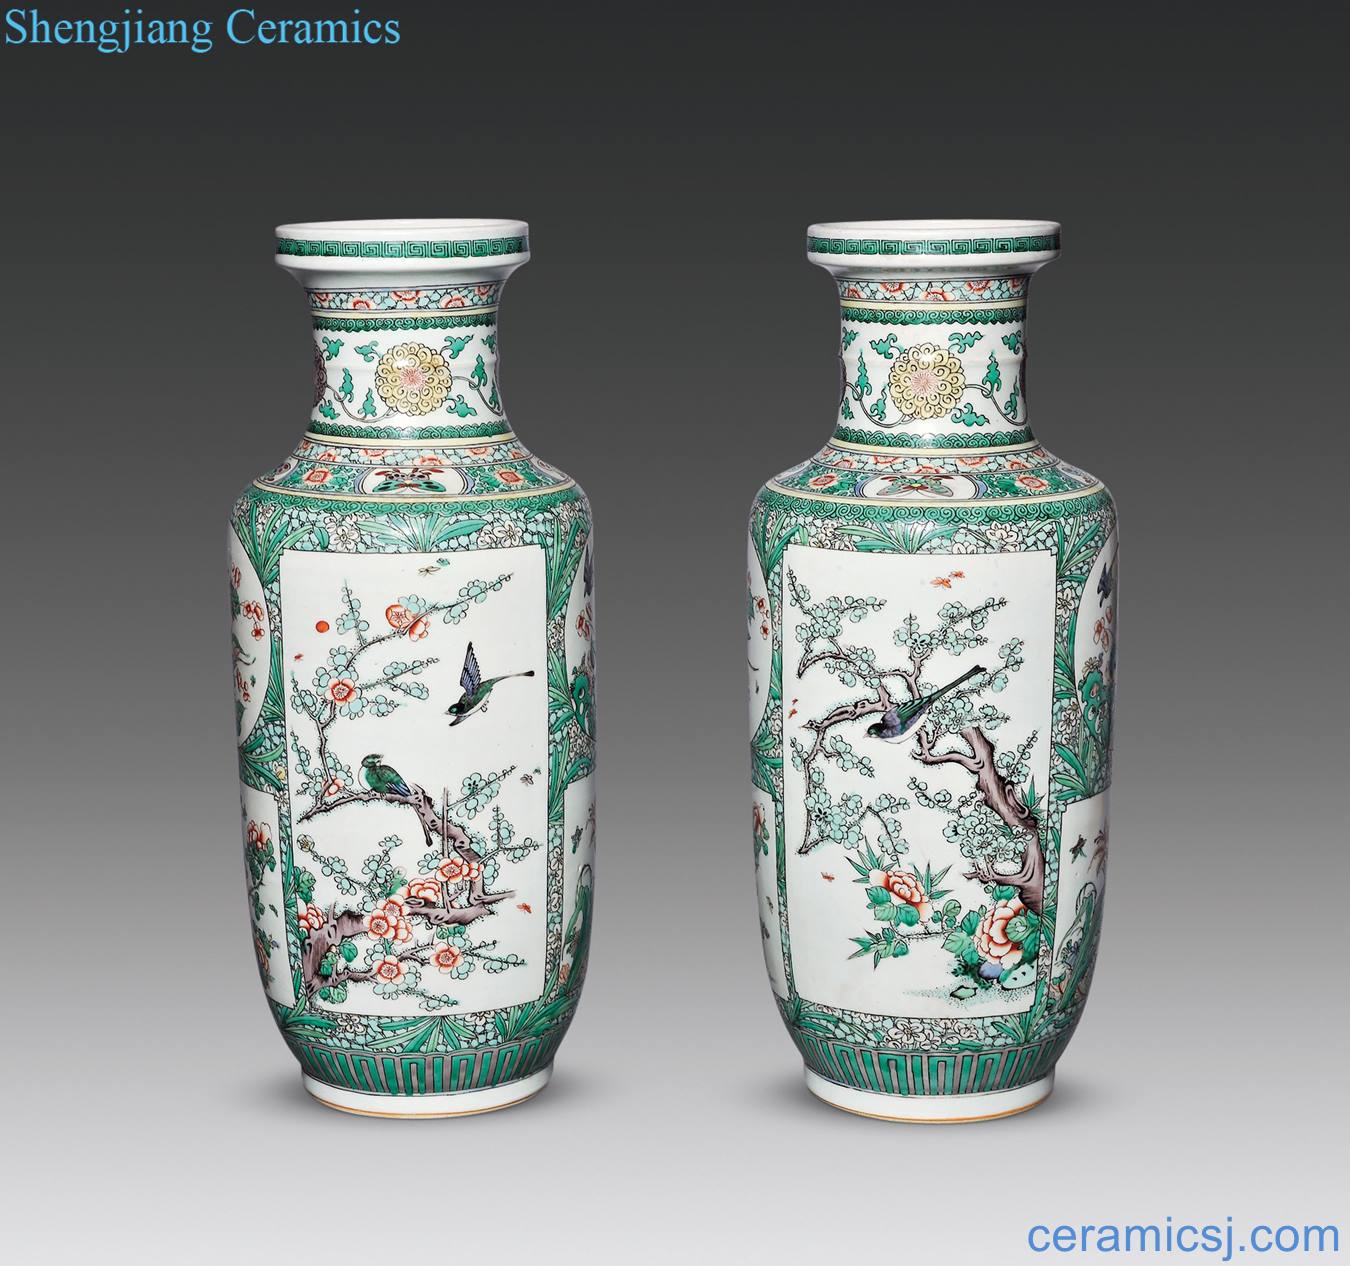 In late qing dynasty Colorful flower medallion flower-and-bird lines were bottles of (a)